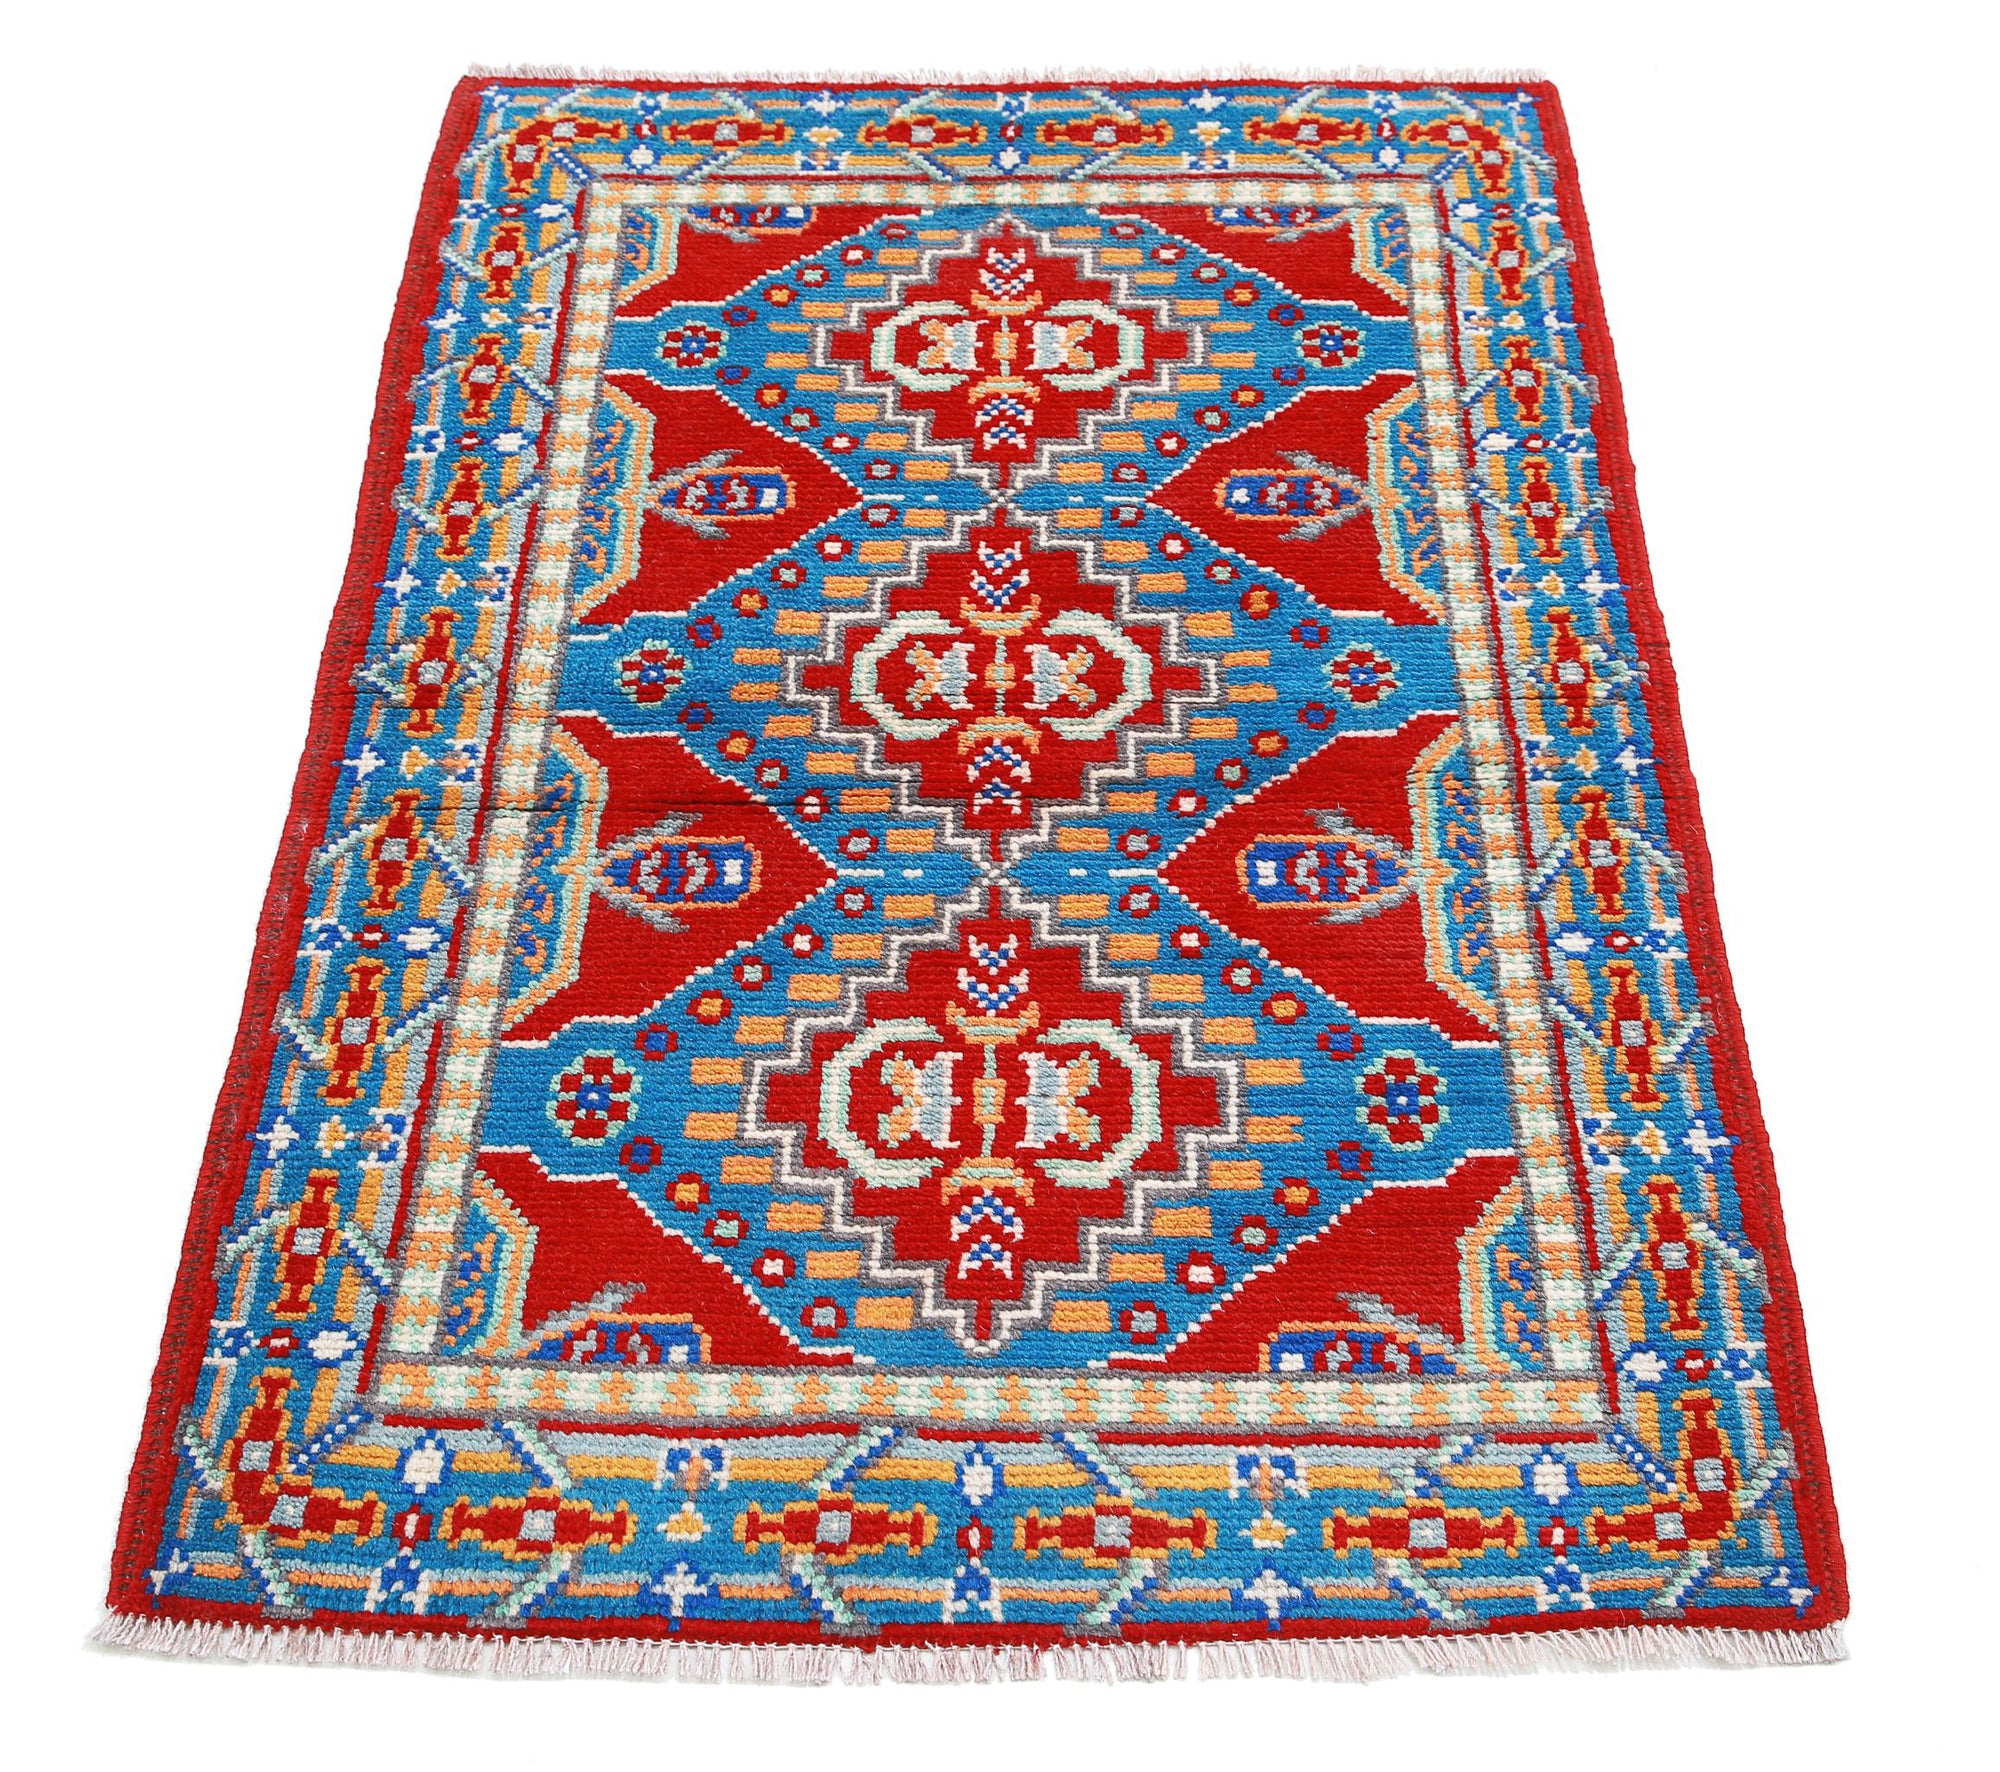 Revival-hand-knotted-qarghani-wool-rug-5014194-3.jpg